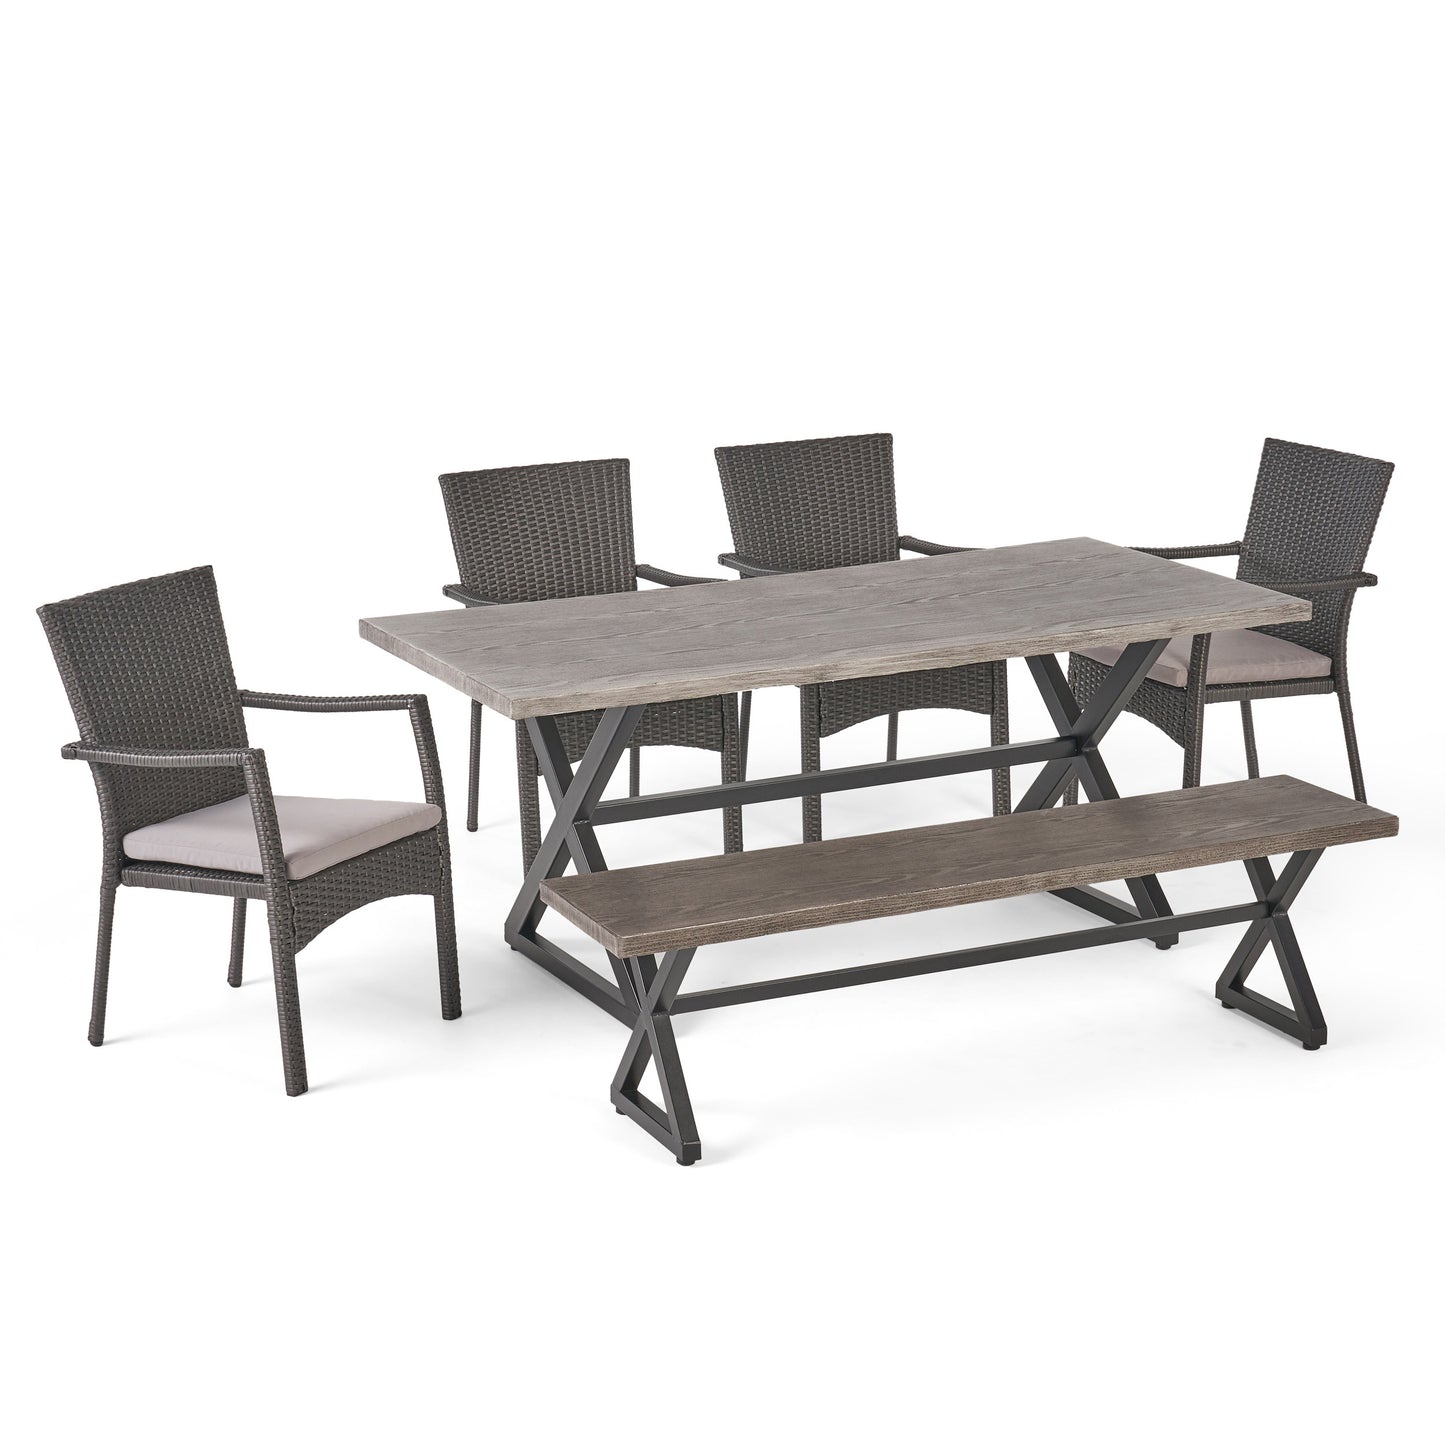 Tripoli Outdoor 6 Piece Aluminum Dining Set with Bench and Wicker Dining Chairs